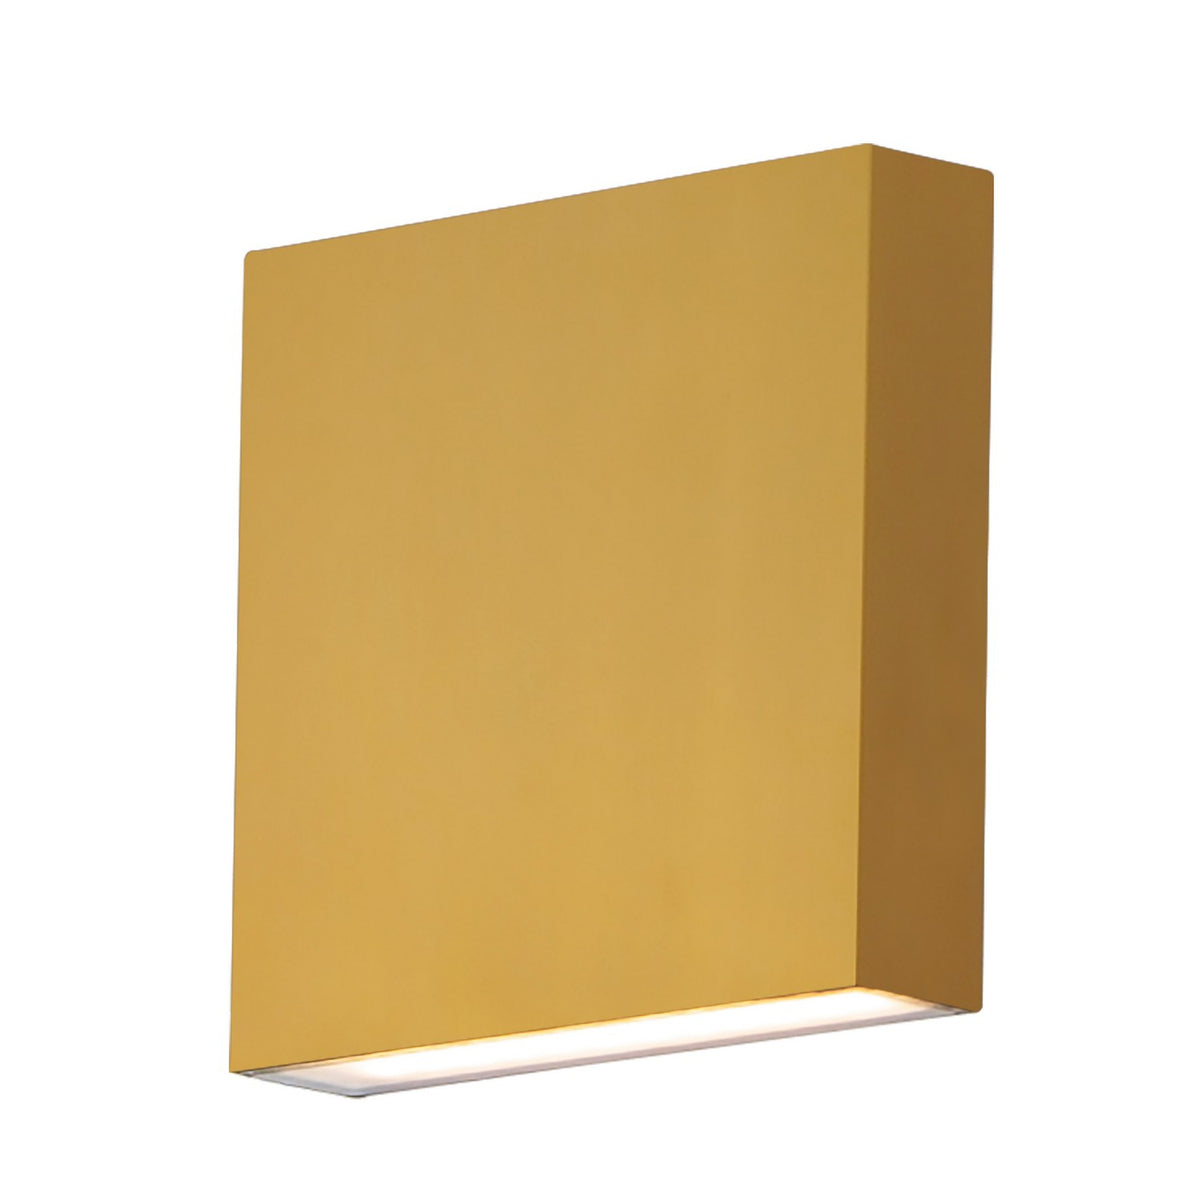 ET2 - E23214-NAB - LED Outdoor Wall Sconce - Brik - Natural Aged Brass